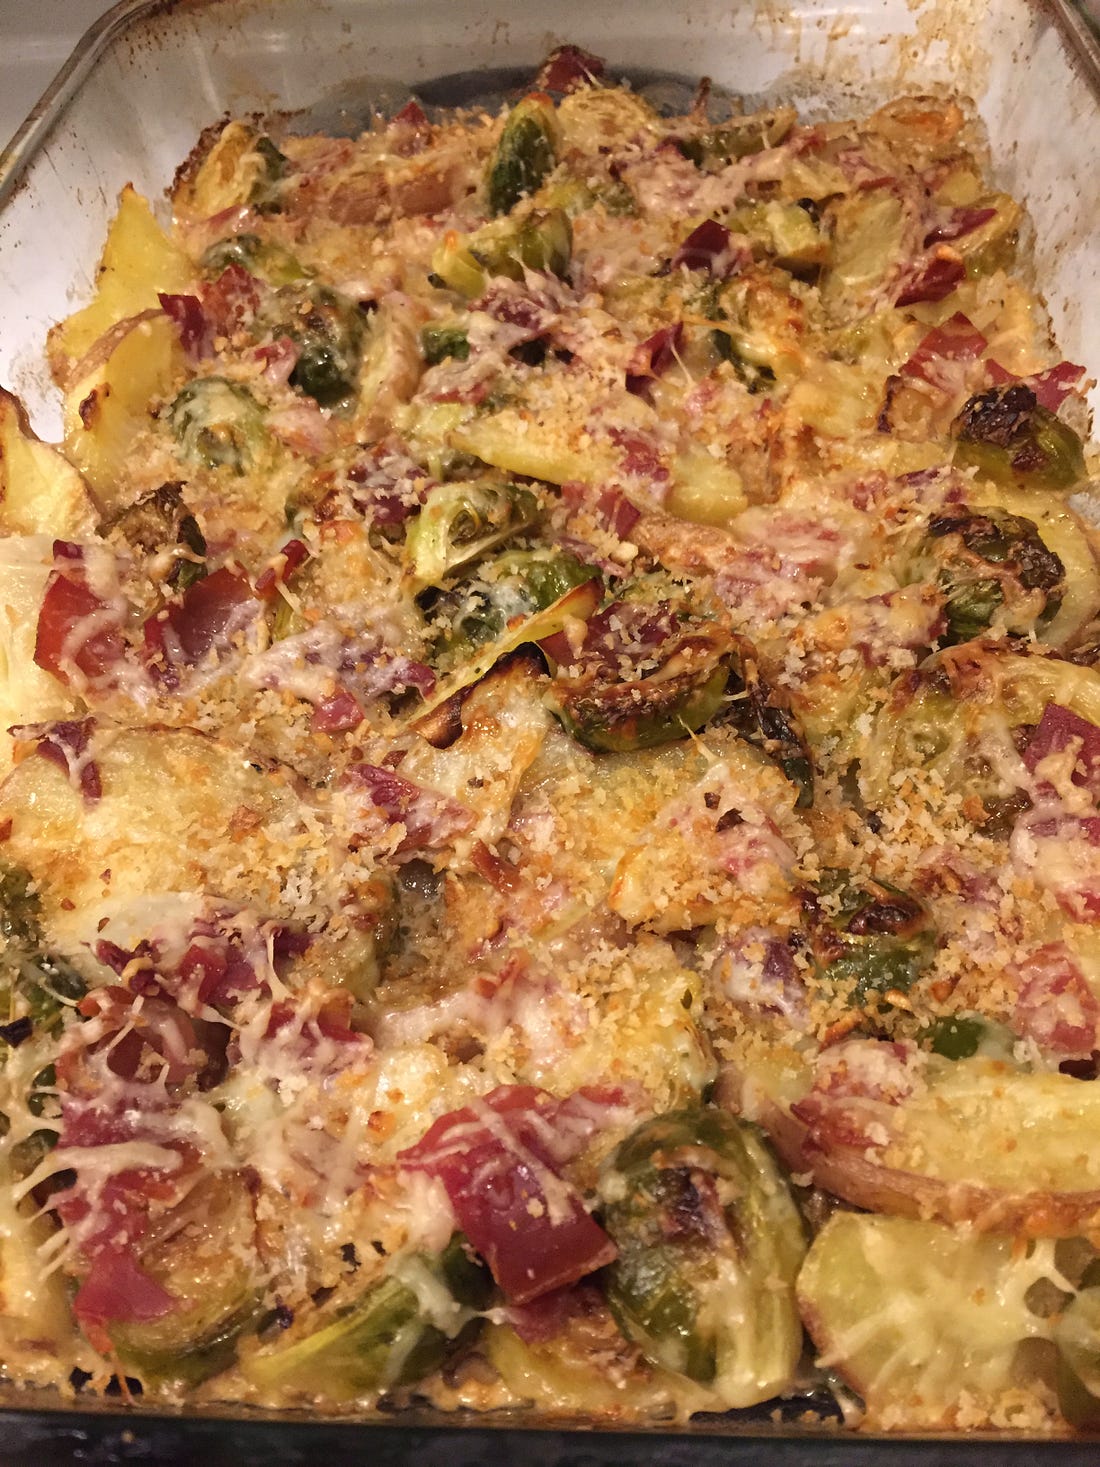 a baking dish full of the gratin described above. Breadcrumbs are scattered over the top, and beneath a thin layer of browned cheese are pieces of prosciutto, potato wedges, and halved brussels sprouts with onions throughout.